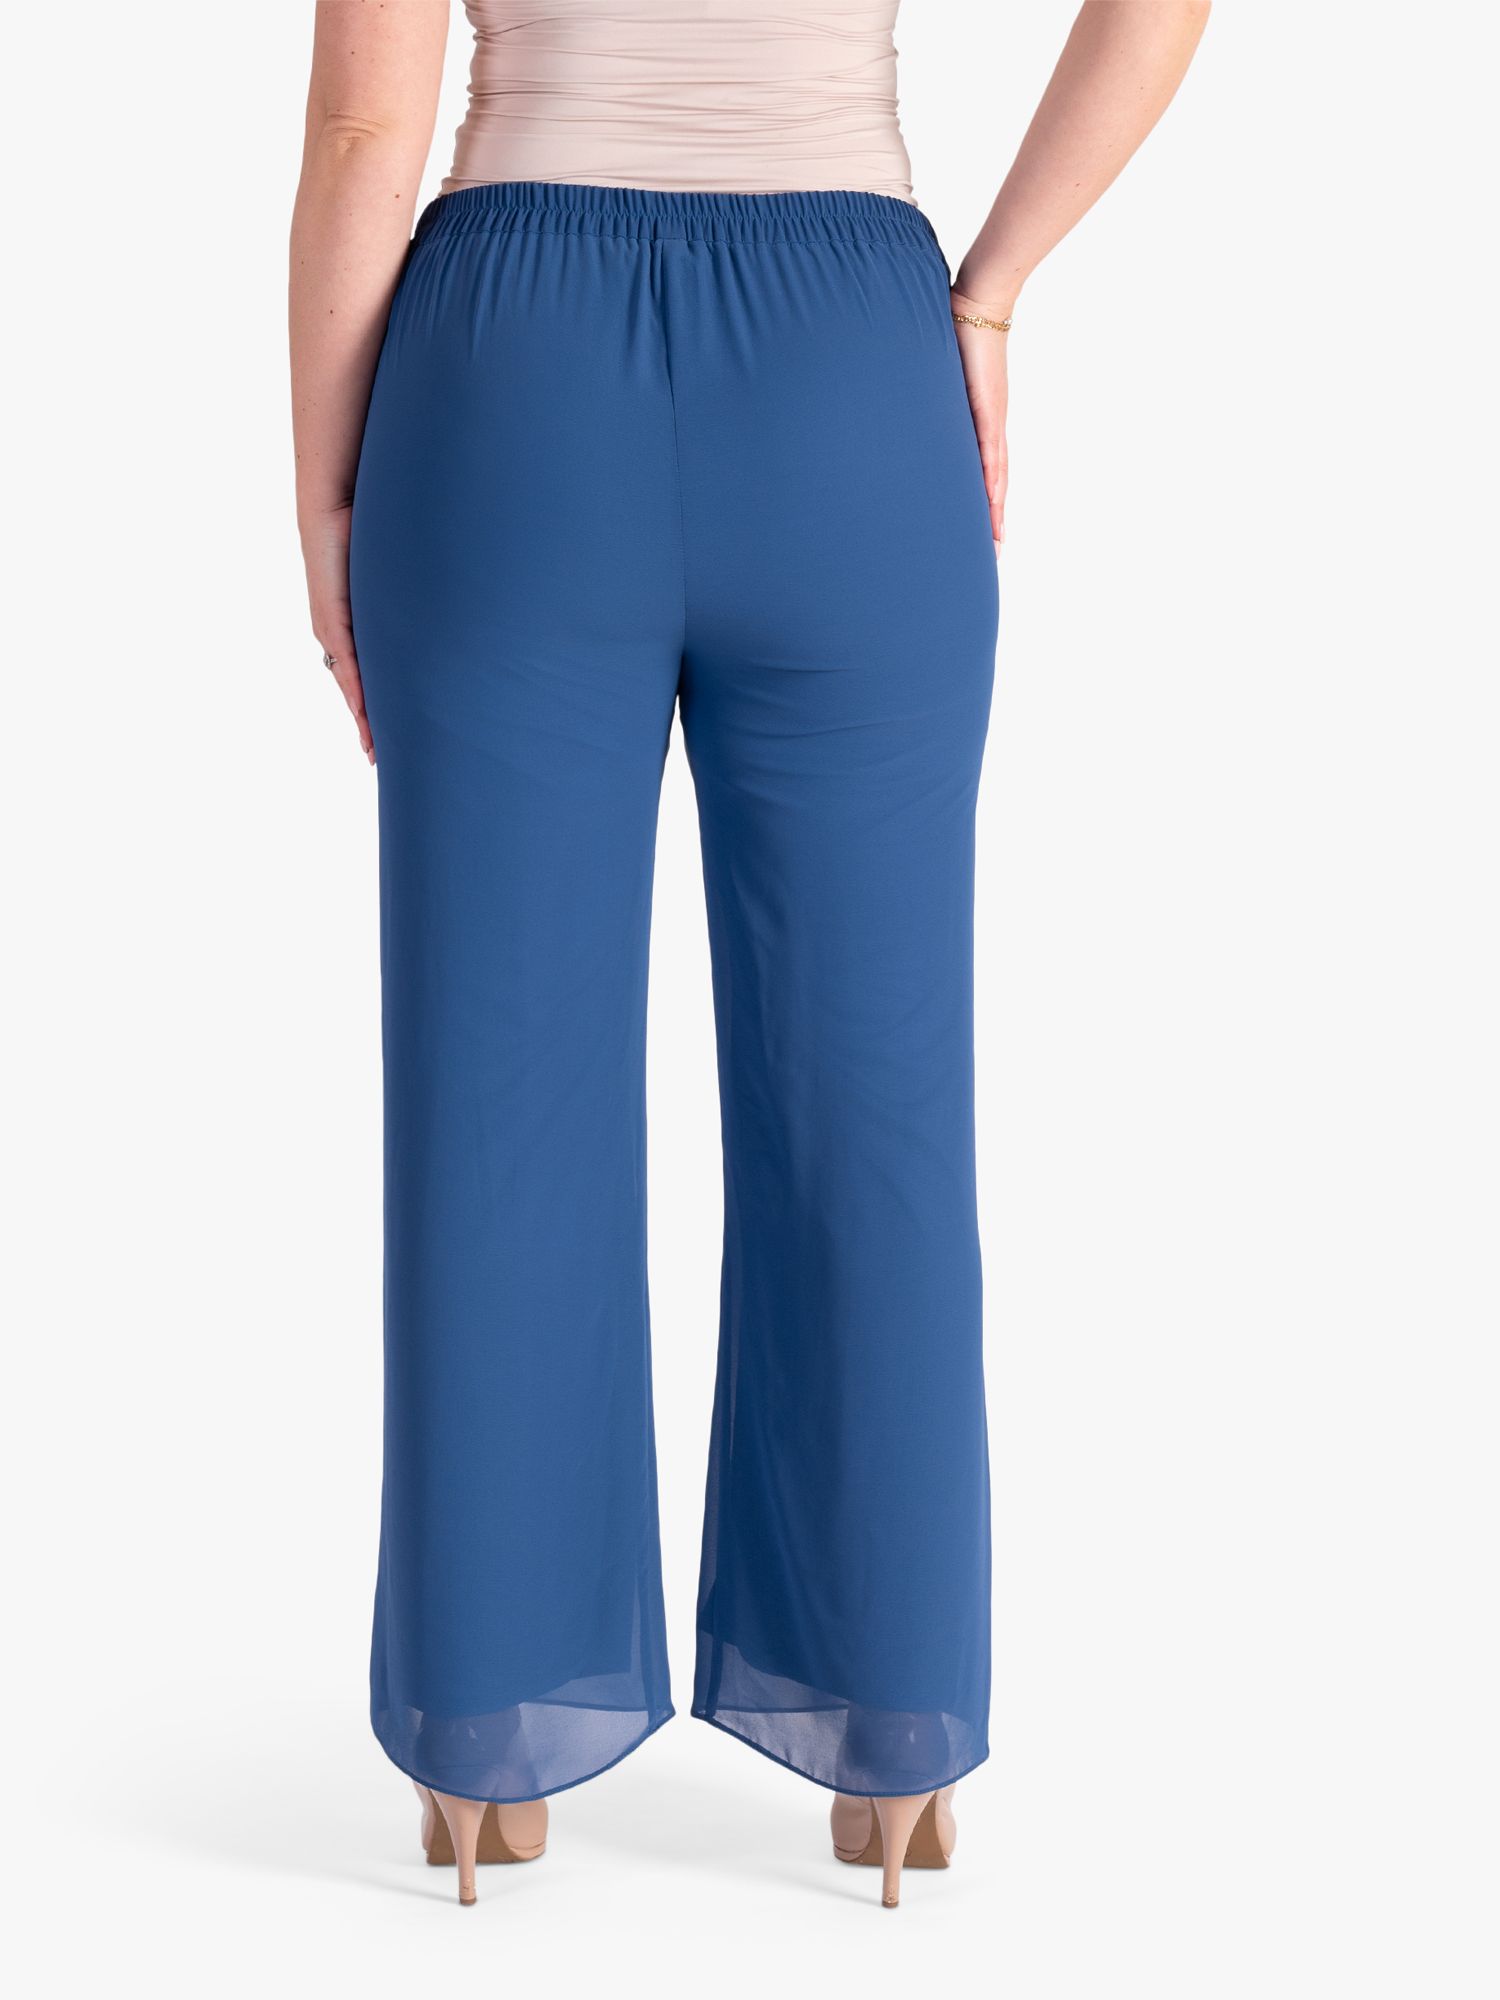 chesca Jersey Lined Chiffon Trousers, Bluebird at John Lewis & Partners